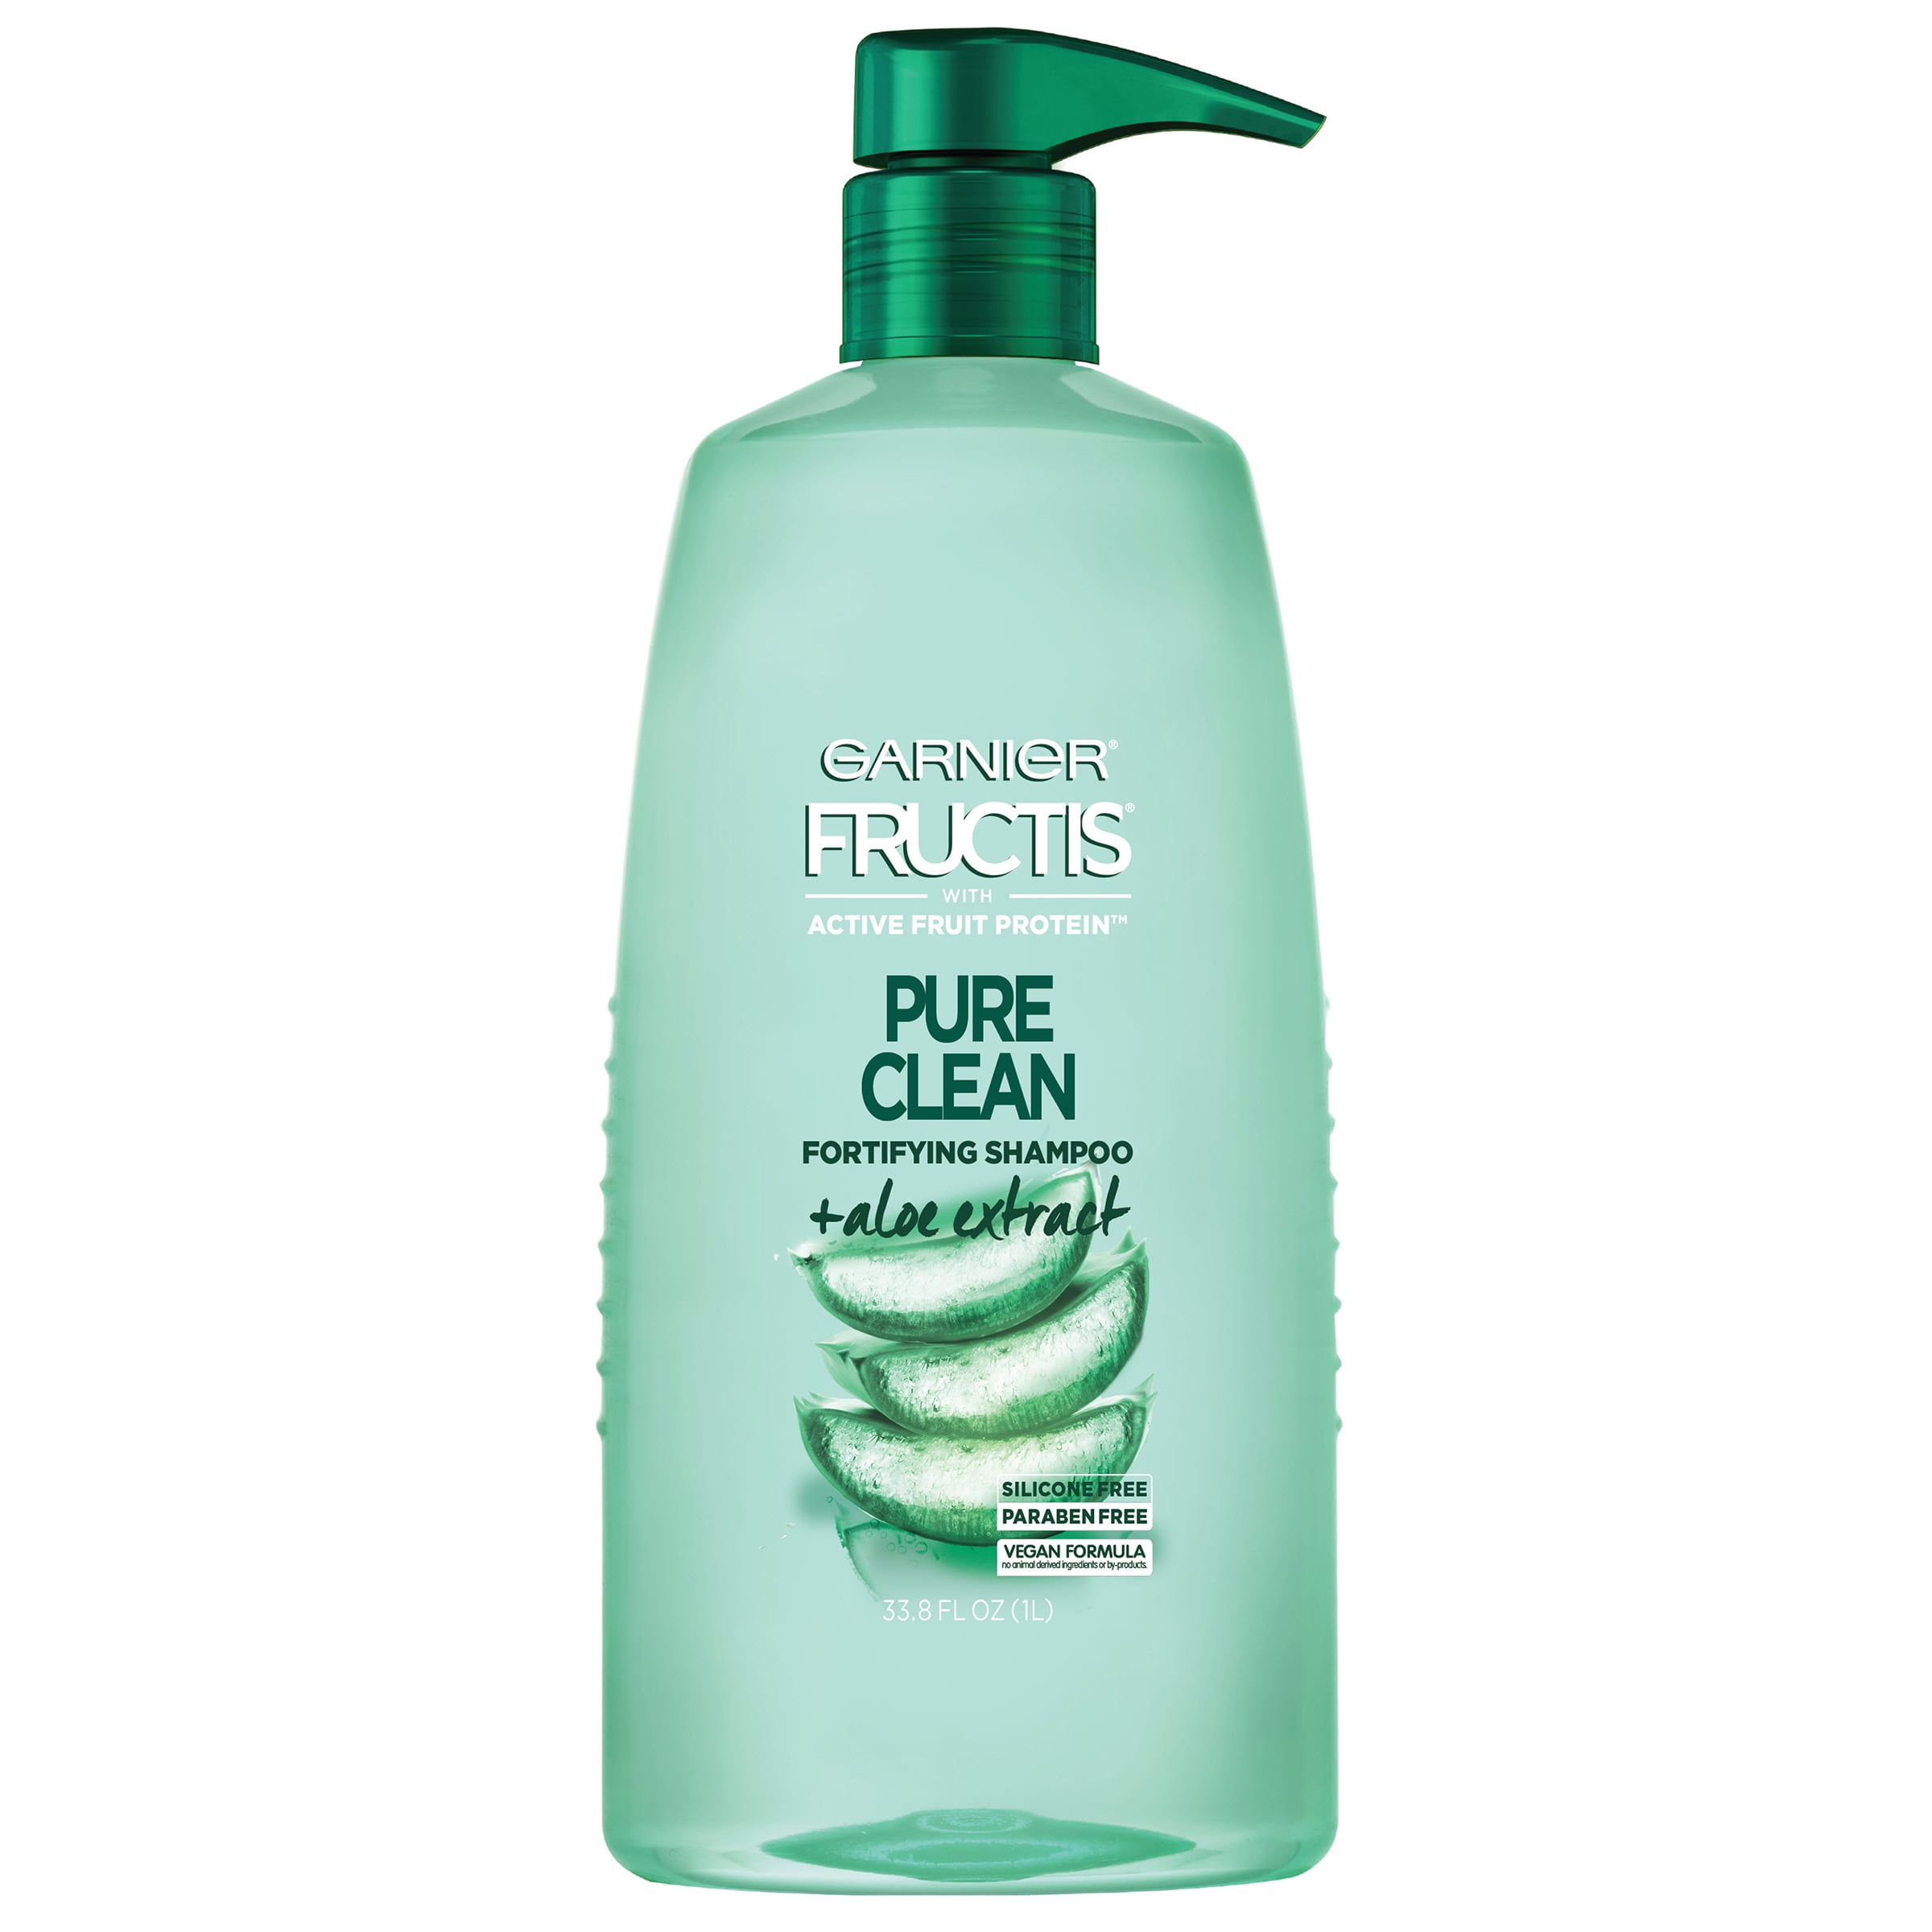 Garnier Fructis Pure Clean Fortifying Shampoo, With Aloe and Vitamin Extract, 33.8 fl. oz. - 2 Pack - Walmart.com